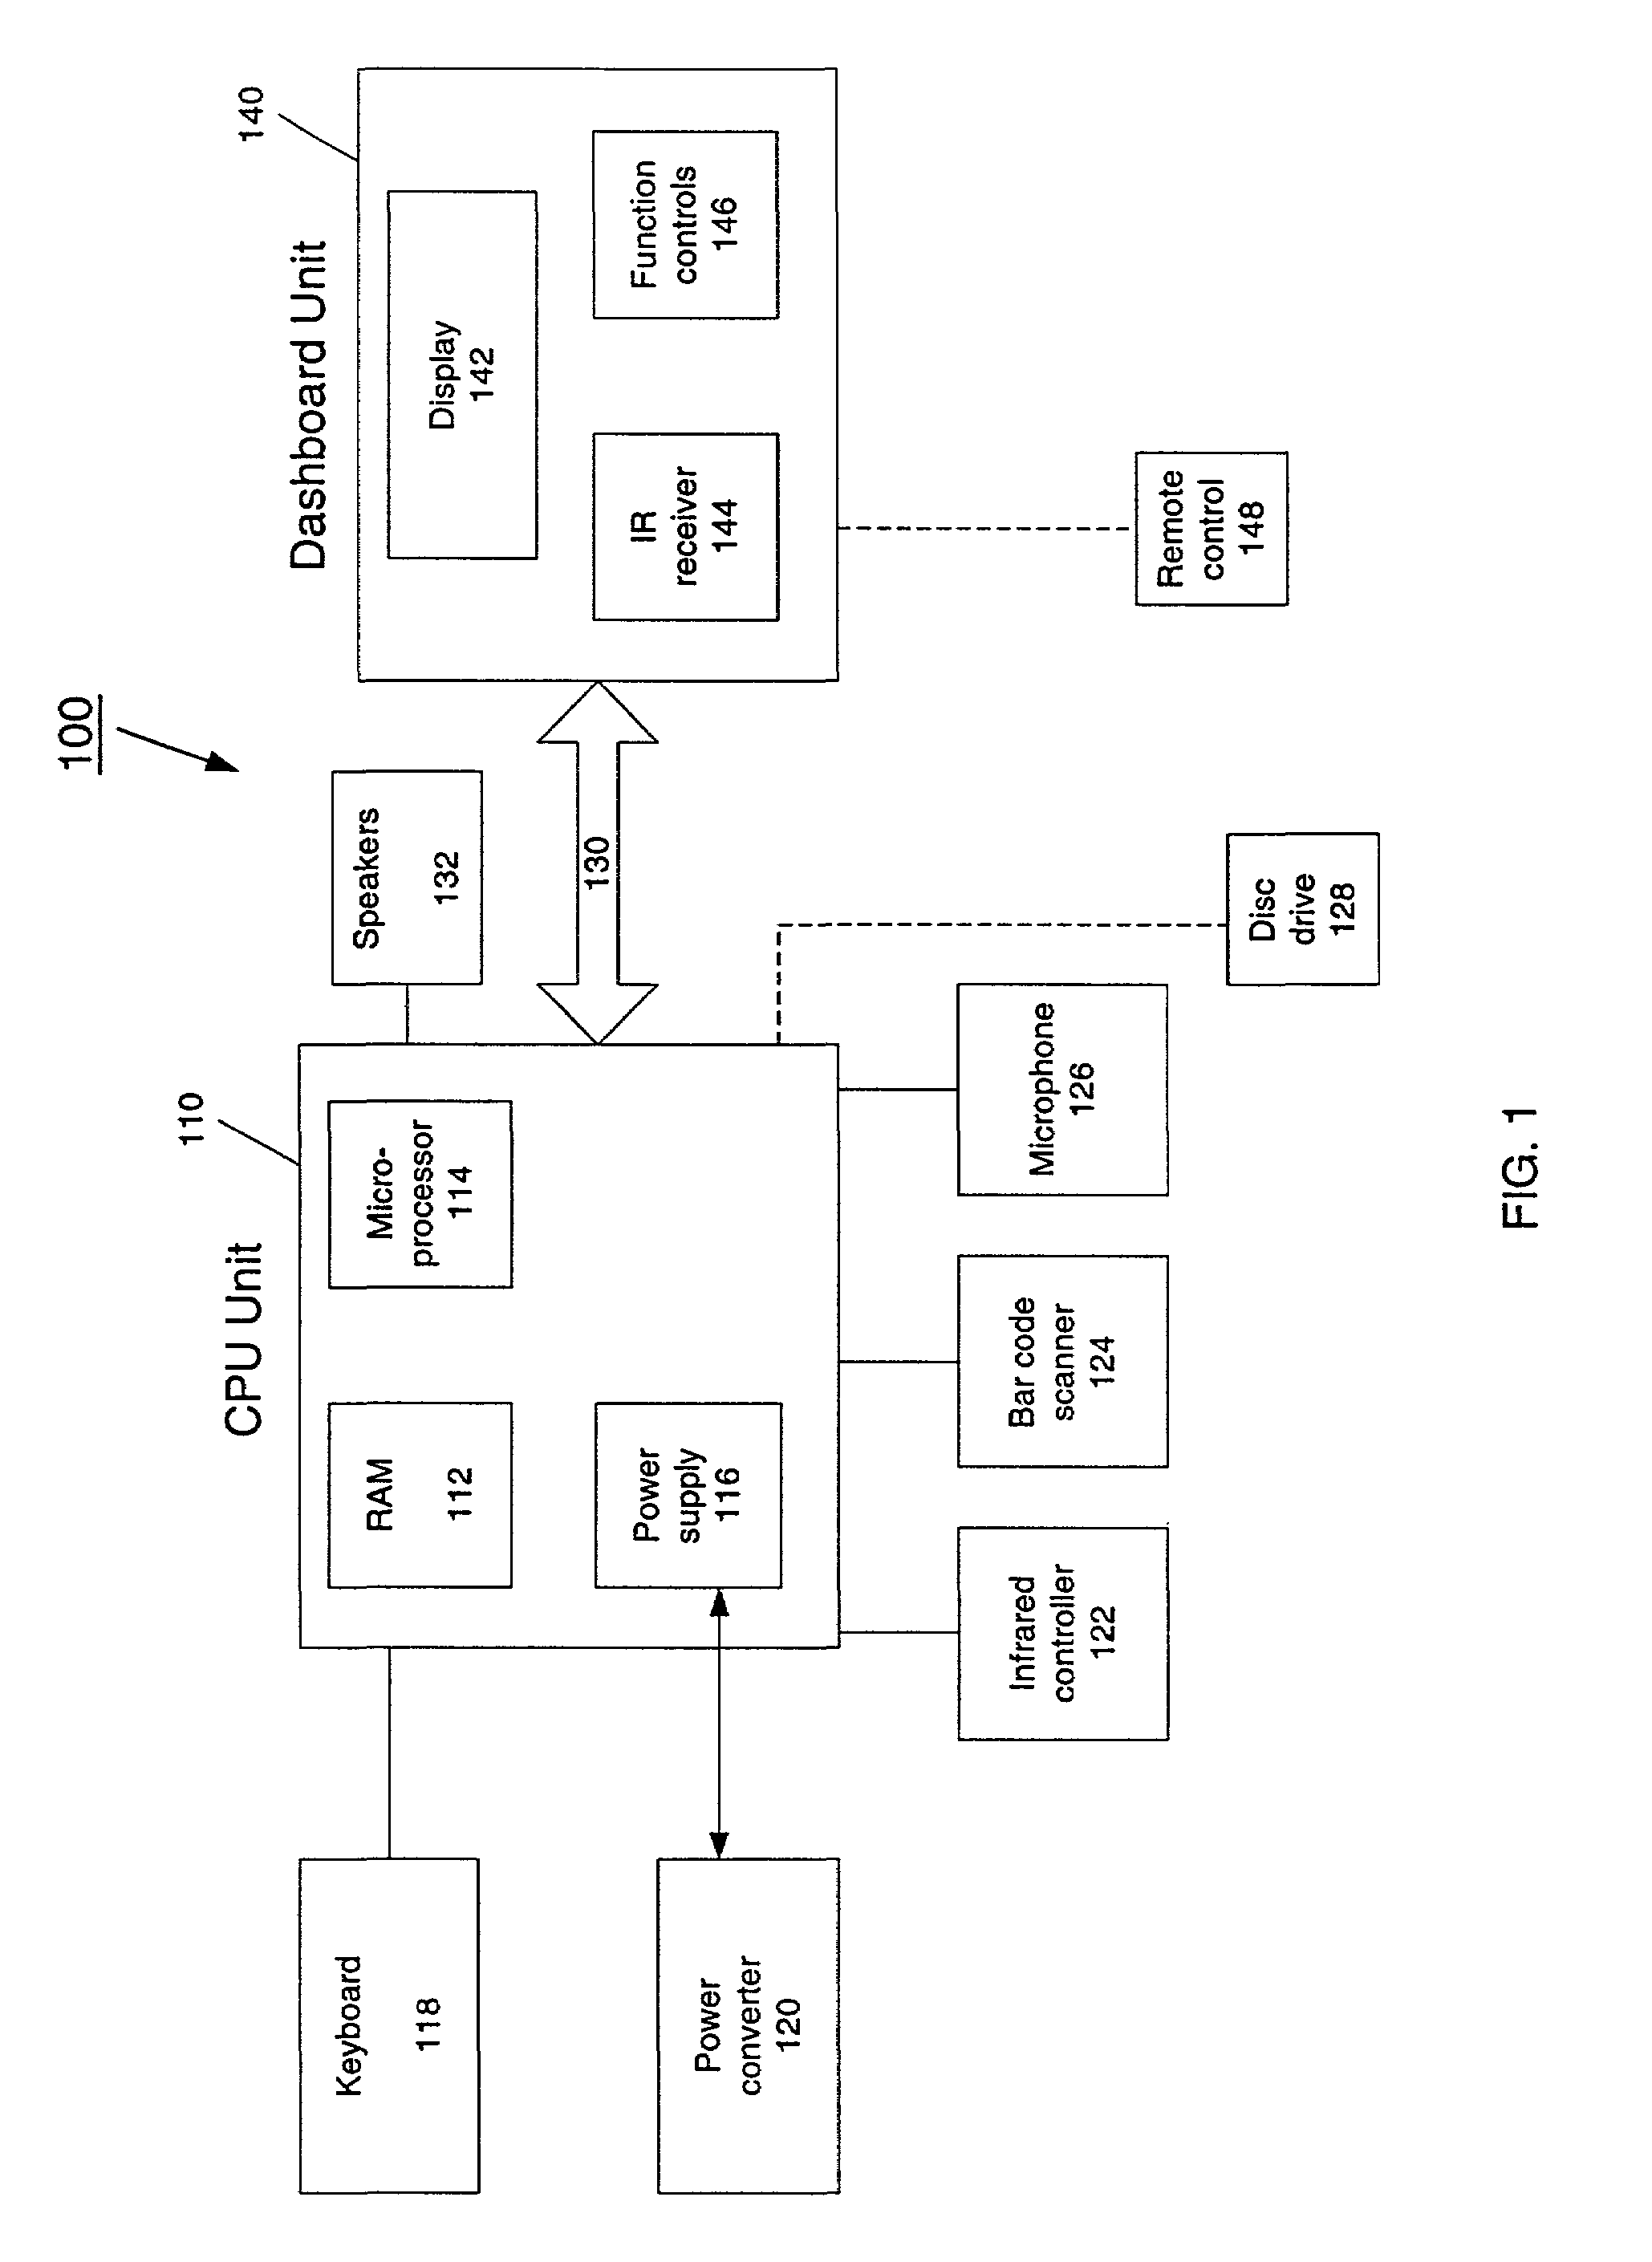 Voice-controlled system for providing digital audio content in an automobile